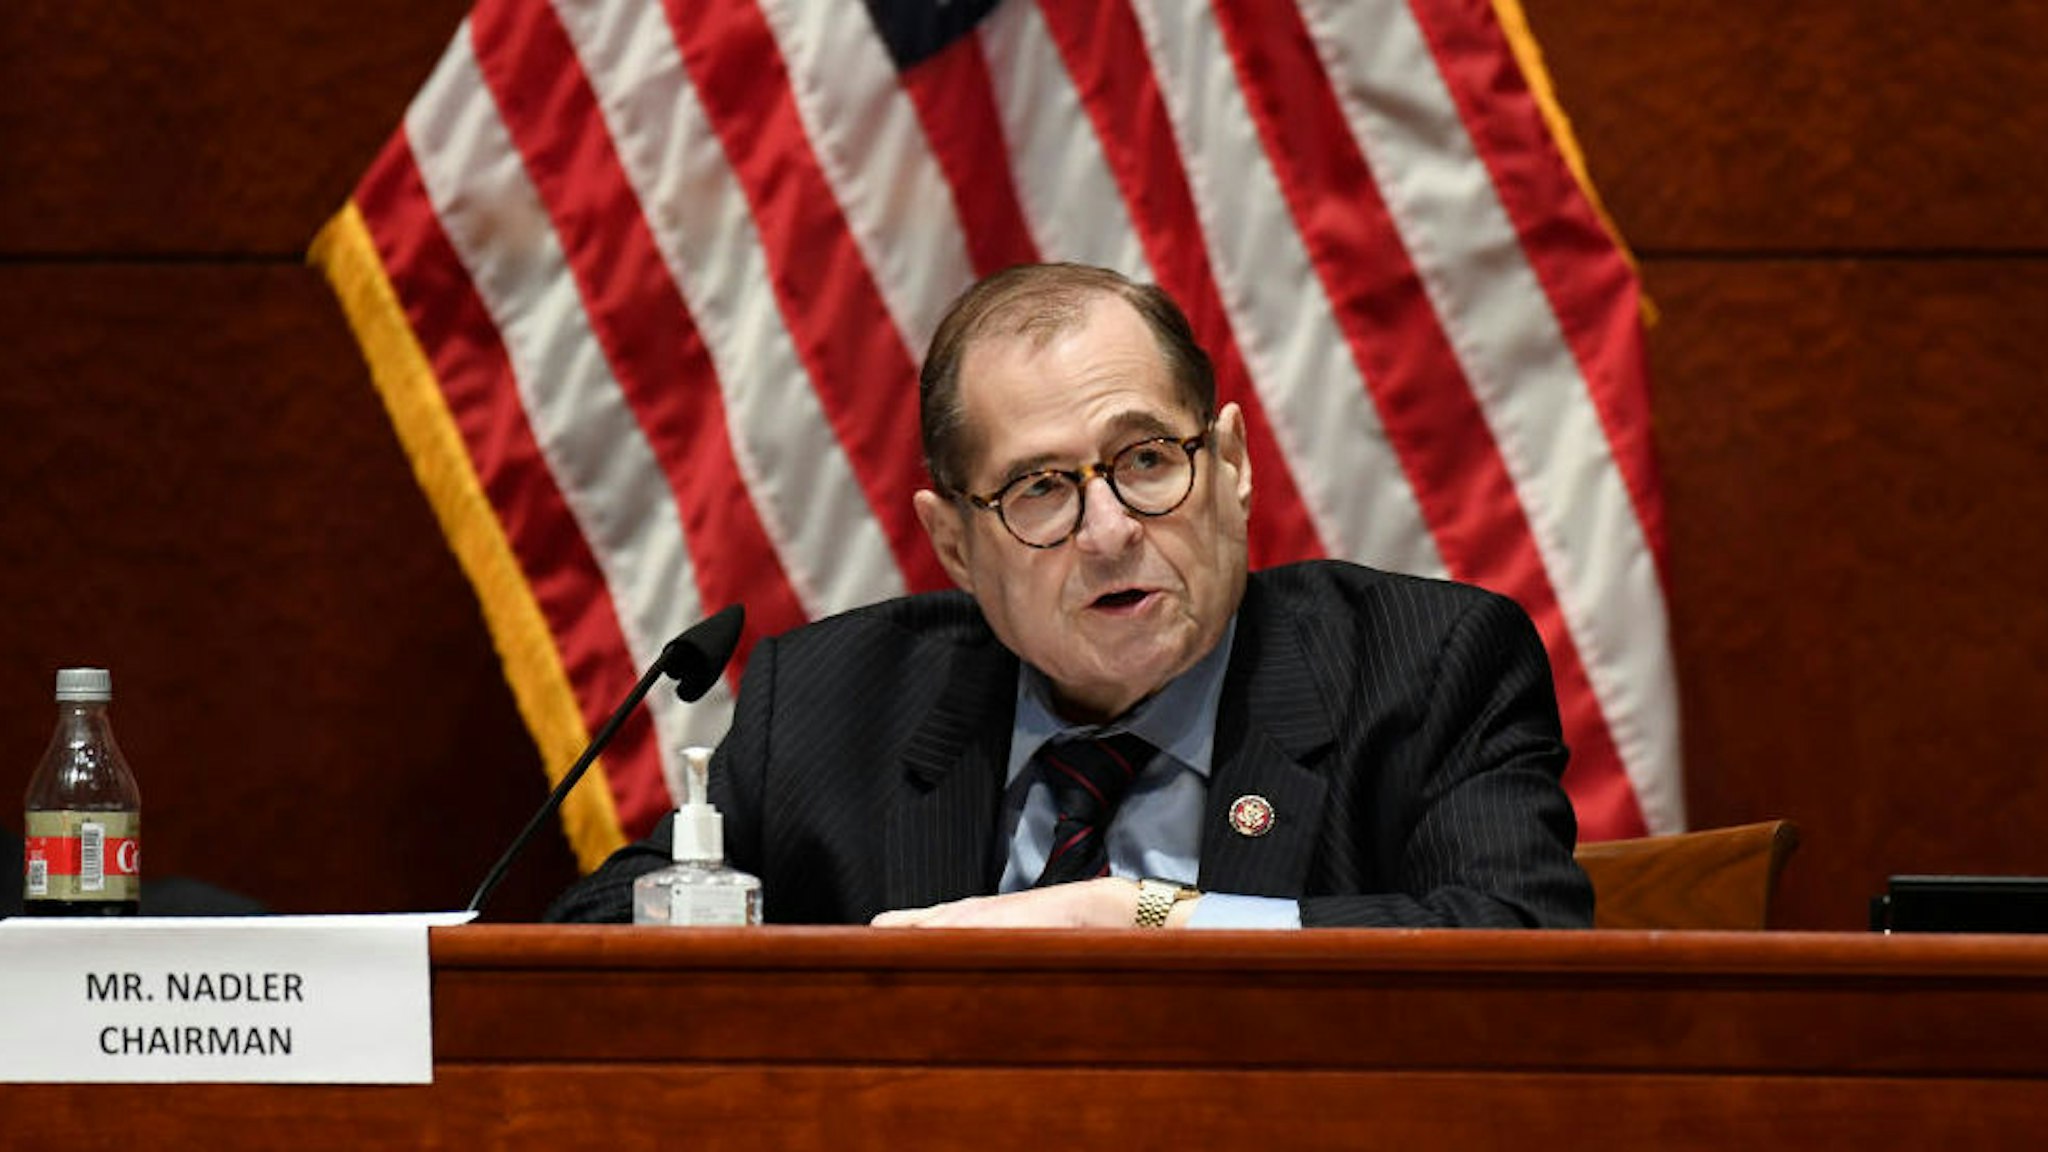 WASHINGTON, DC - JUNE 24: House Judiciary Committee Chairman Rep. Jerrold Nadler (D-NY) speaks during a hearing on oversight of the Justice Department and a probe into the politicization of the department under Attorney General William Barr on Capitol Hill, June 24, 2020 in Washington, DC.